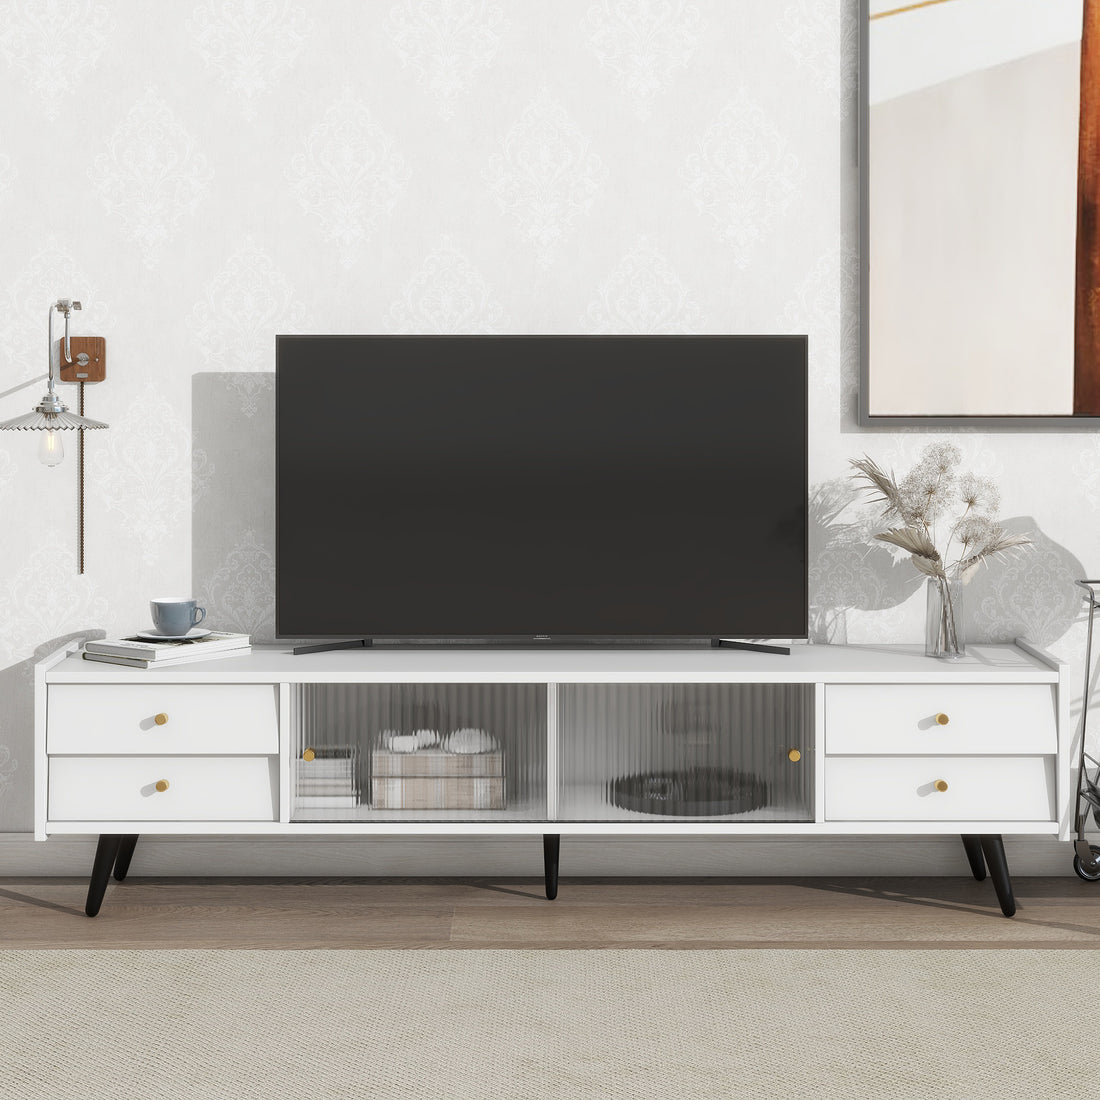 ON TREND Chic Elegant Design TV Stand with Sliding